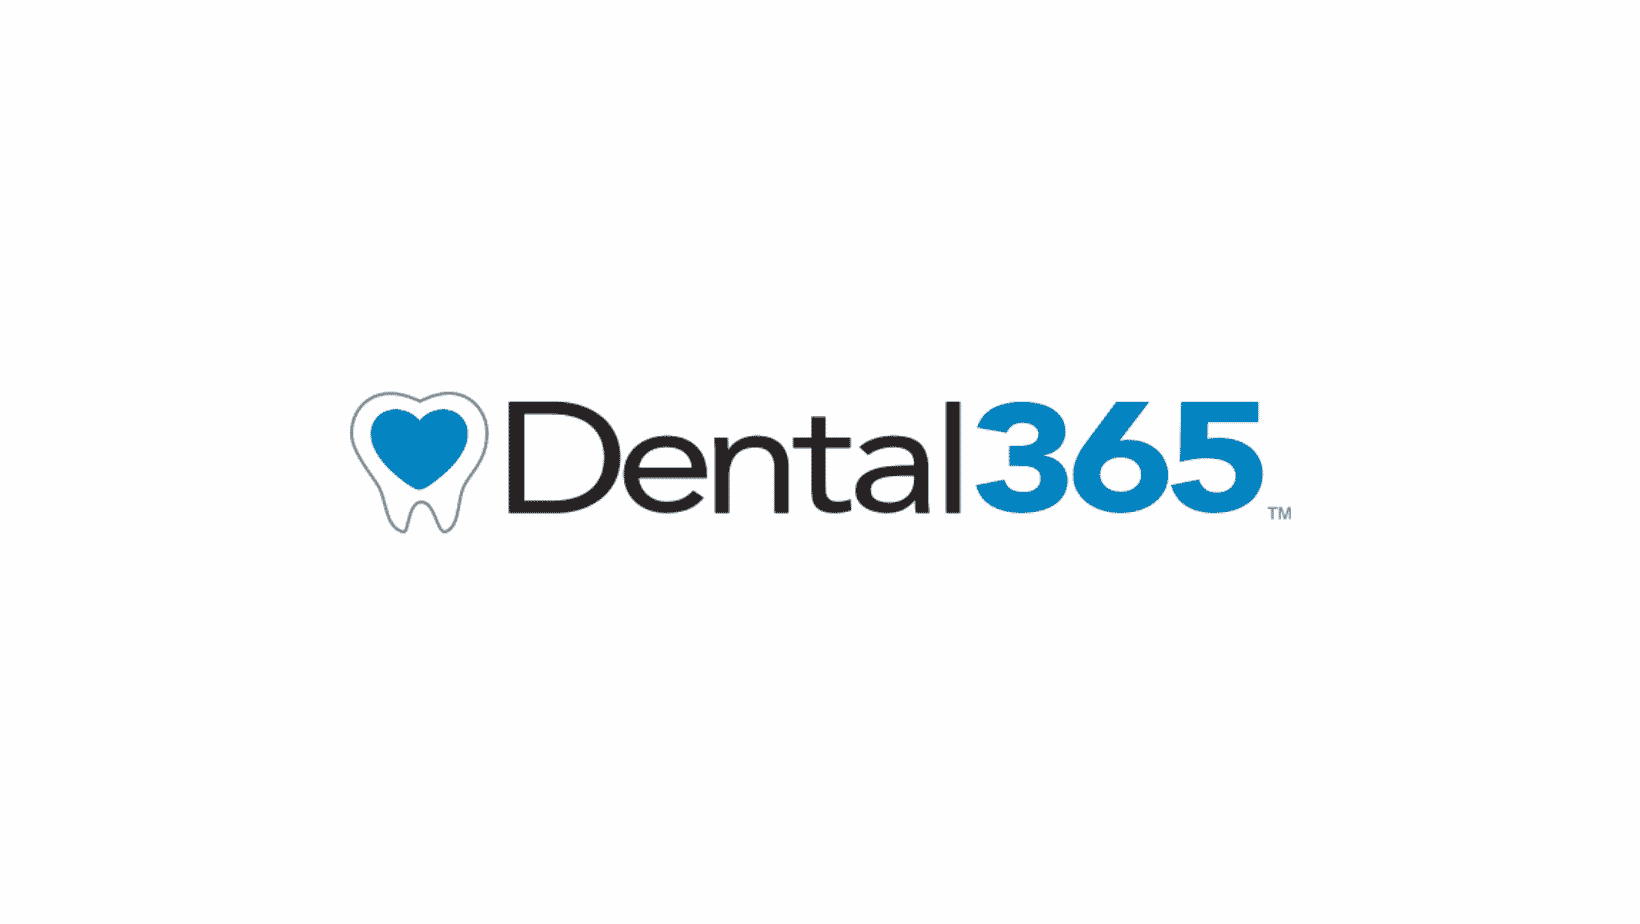 Dental365 Named One of New York’s Fastest Growing Companies